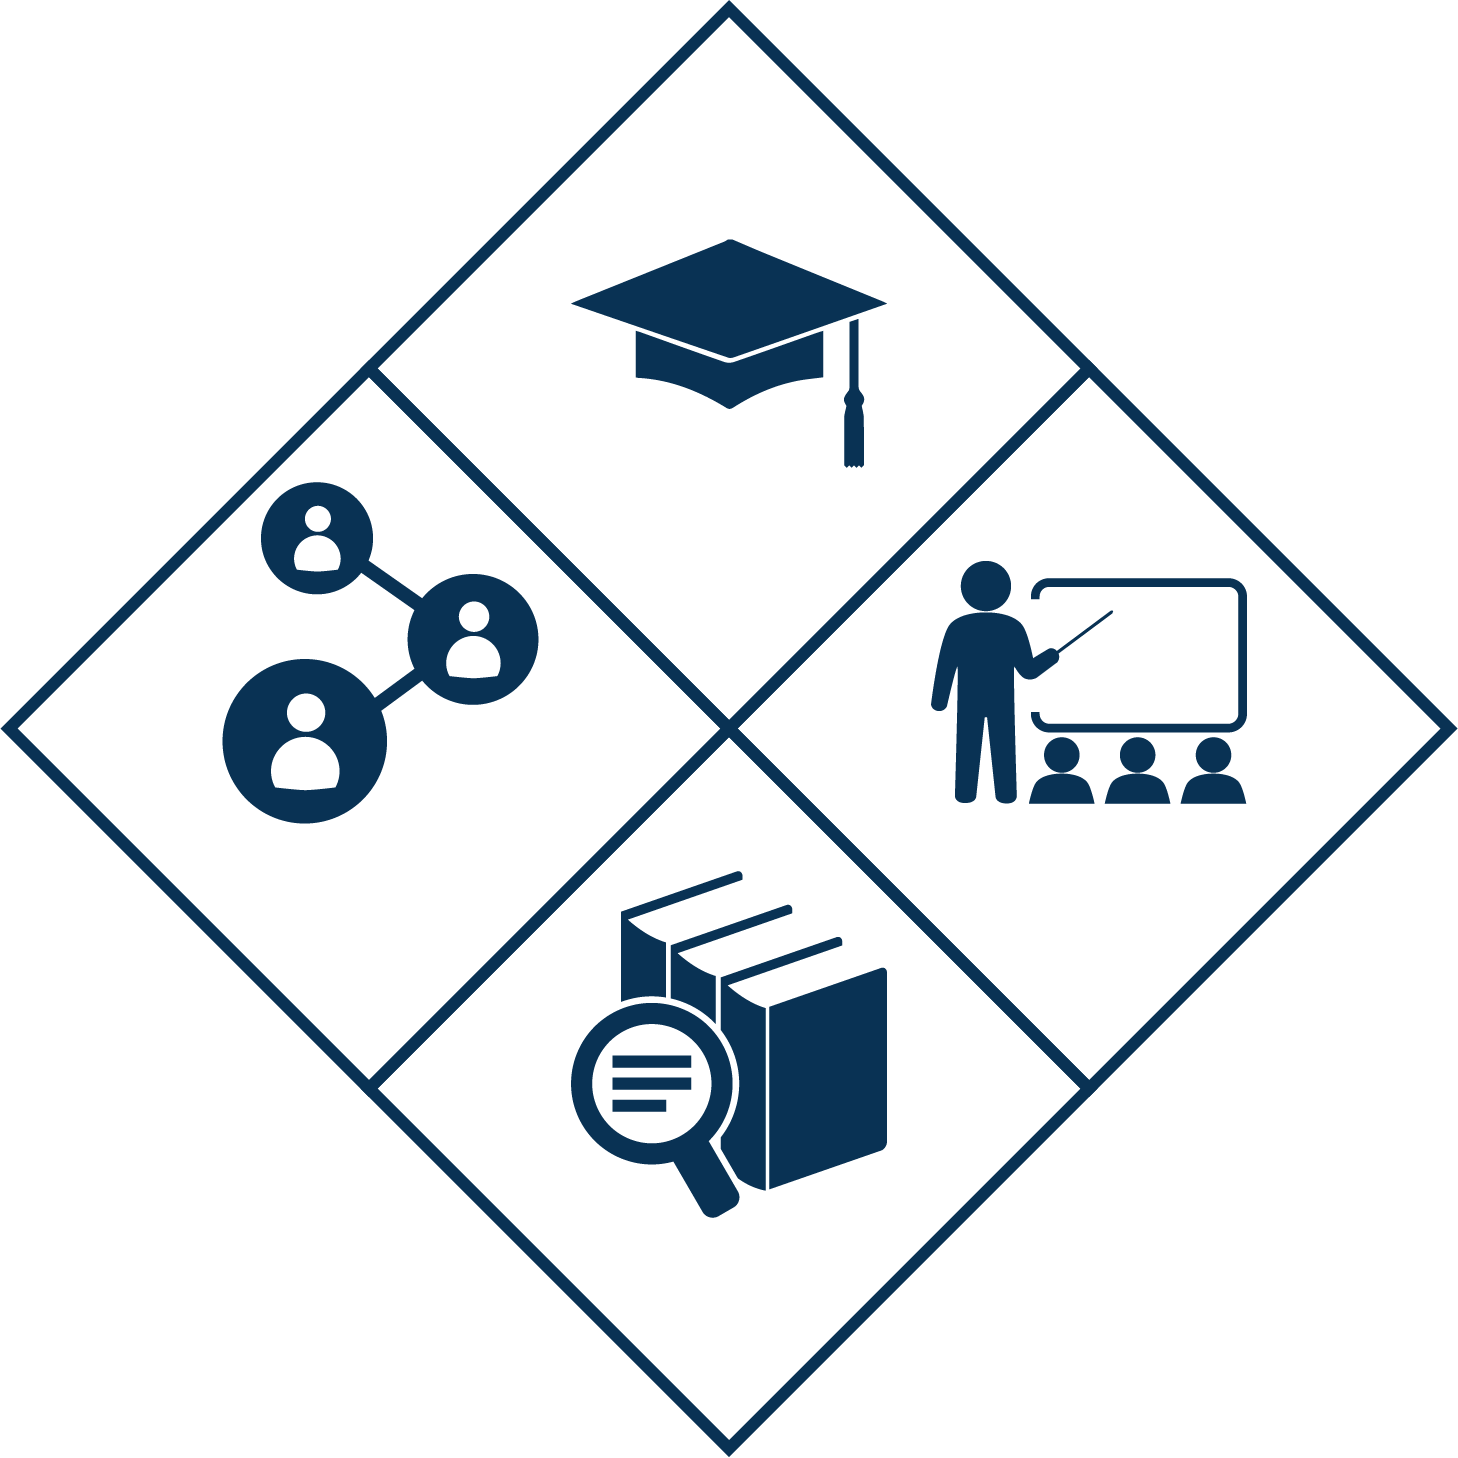 The image is the Faculty Qualities of Excellence (FQE) logo is a diamond shape divided into four smaller diamonds. Each smaller diamond contains a different icon representing one of the four domains of FQE. Starting from the top and moving clockwise, the first diamond contains an image of a graduation cap, symbolizing STUDENT INVESTED. The second diamond shows a person giving a presentation indicating PEDAGOGICALLY EXCELLENT. The third diamond features books with a magnifying glass suggesting CONTENT EXPERT. The fourth diamond depicts a network of people representing INSTITUTIONALLY DEDICATED.